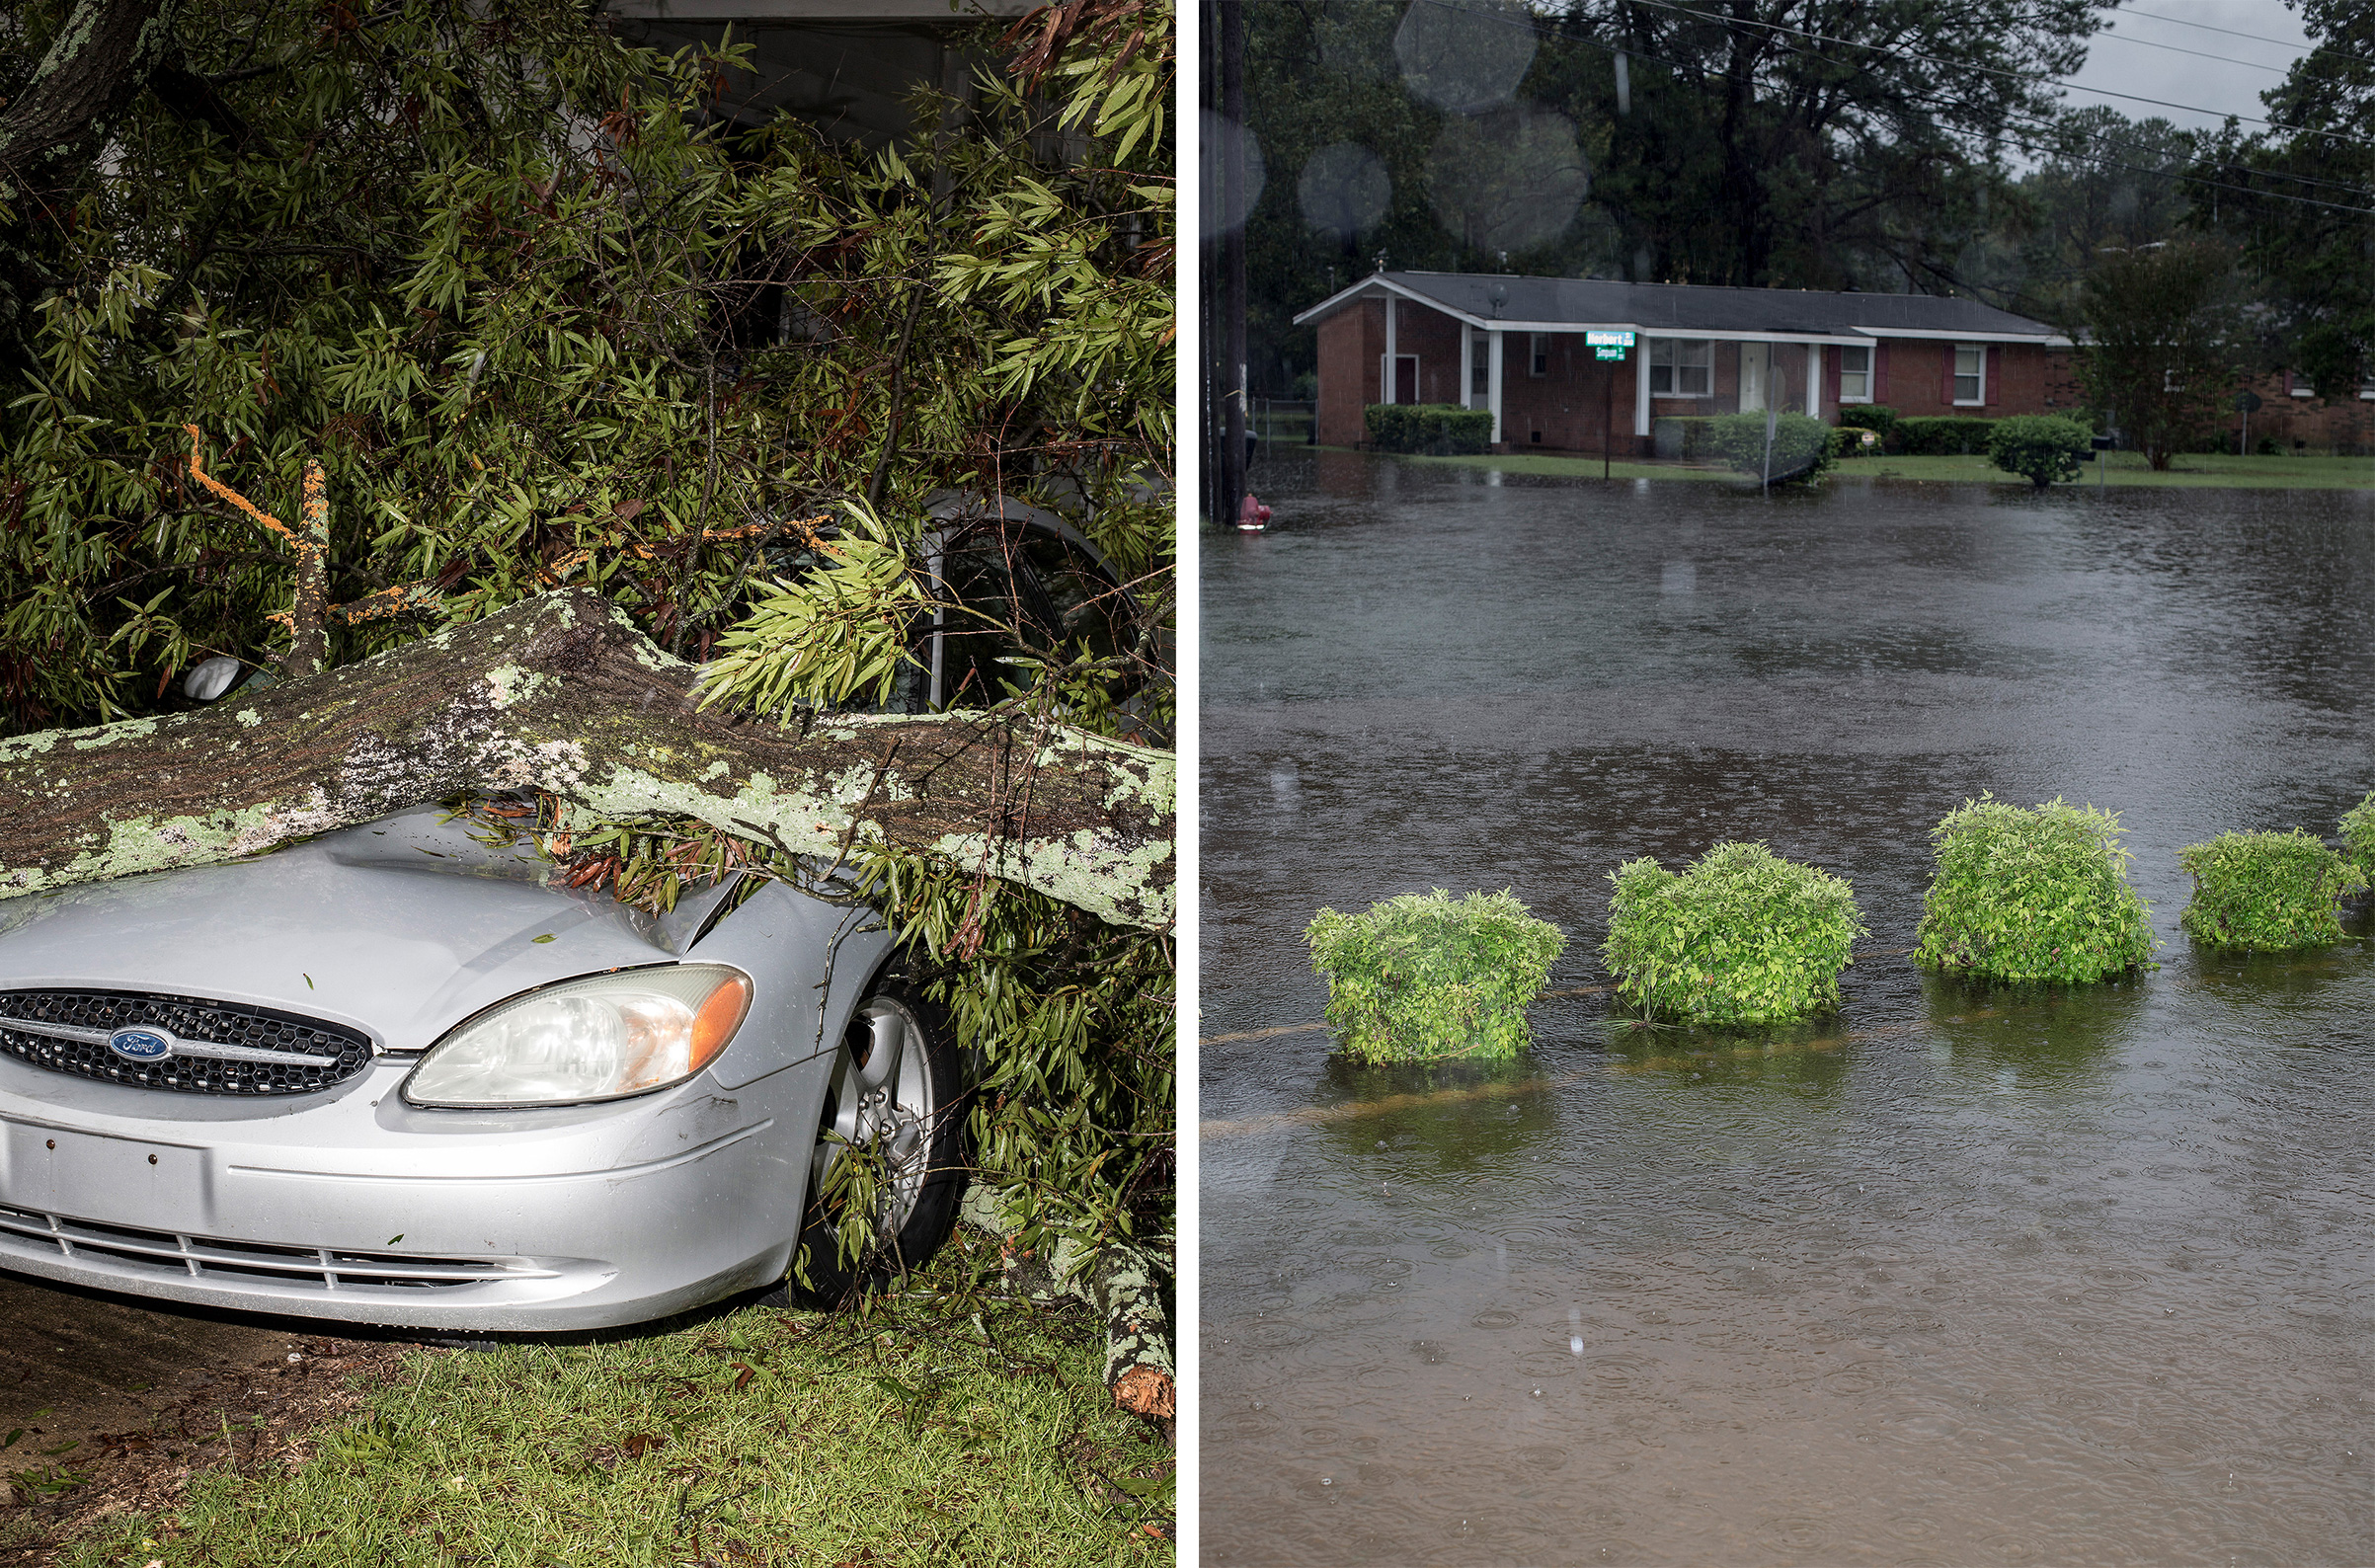 A car which was crushed by a fallen tree due to winds from Hurricane Florence in Goldsboro, N.C. on Sept. 15.; A view of Coy Coley's driveway in Goldsboro. (Bryan Anselm—Redux for TIME)